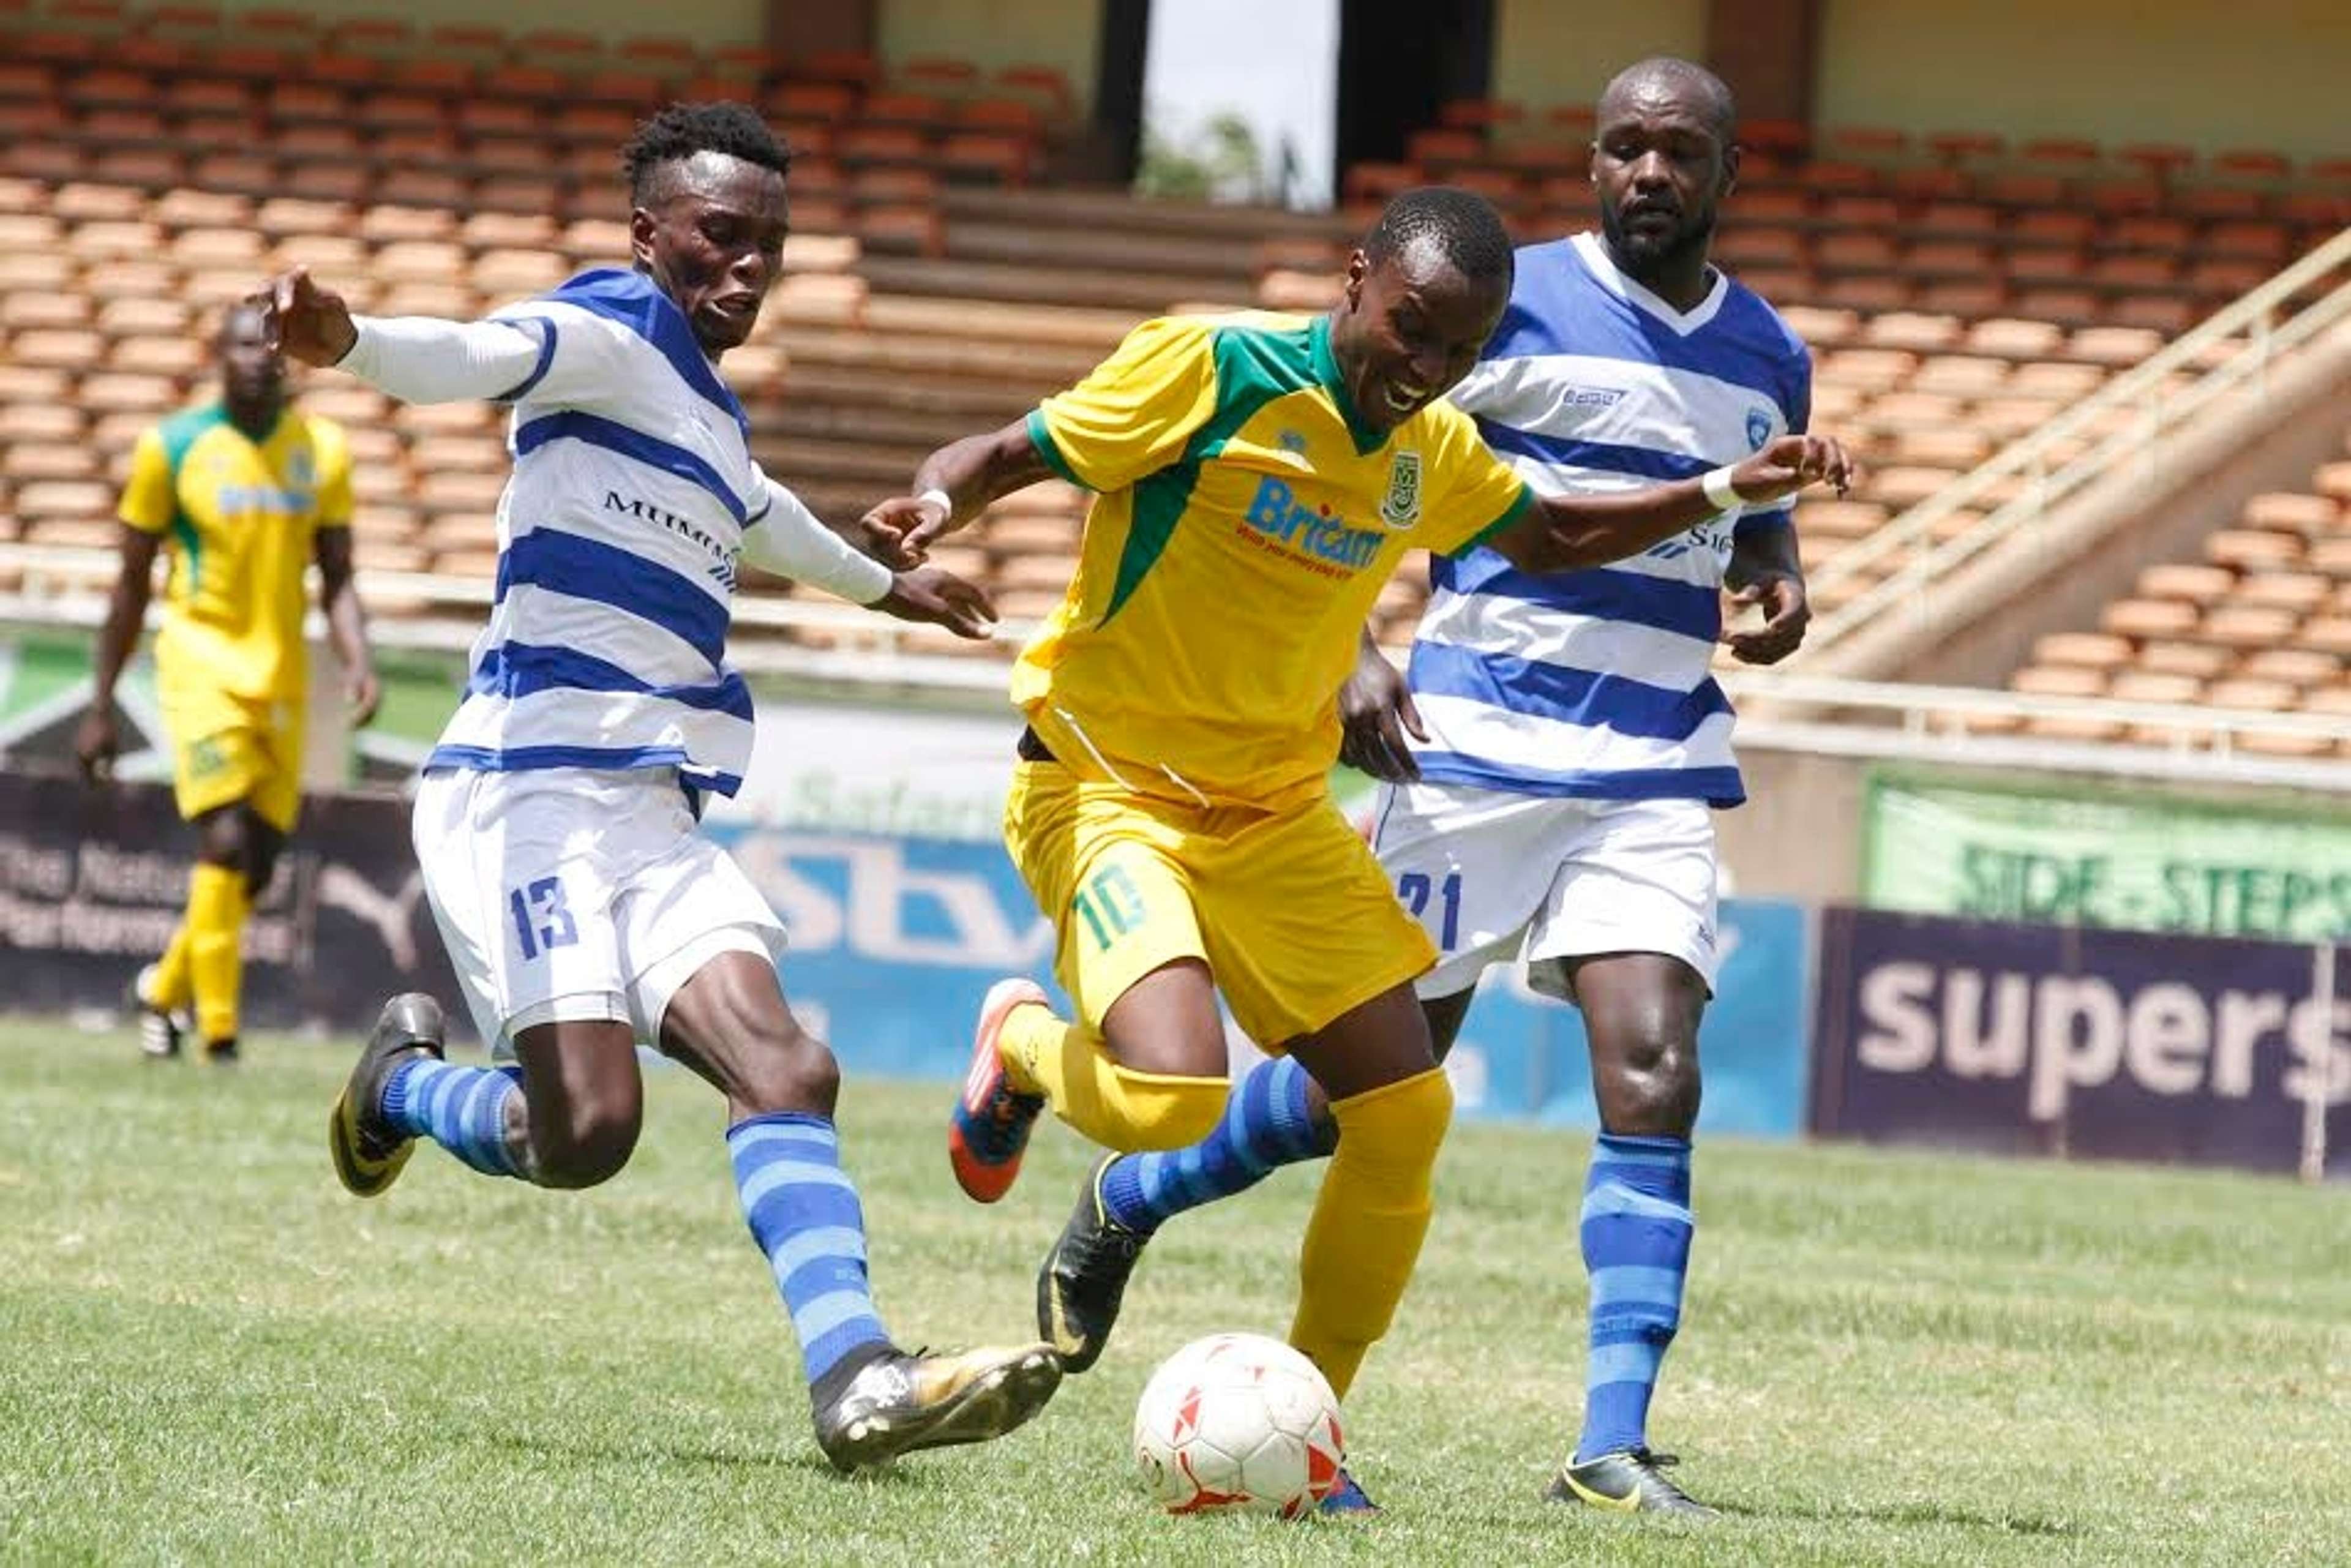 Mathare United player Daniel Mwaura dribbles past AFC Leopards' duo